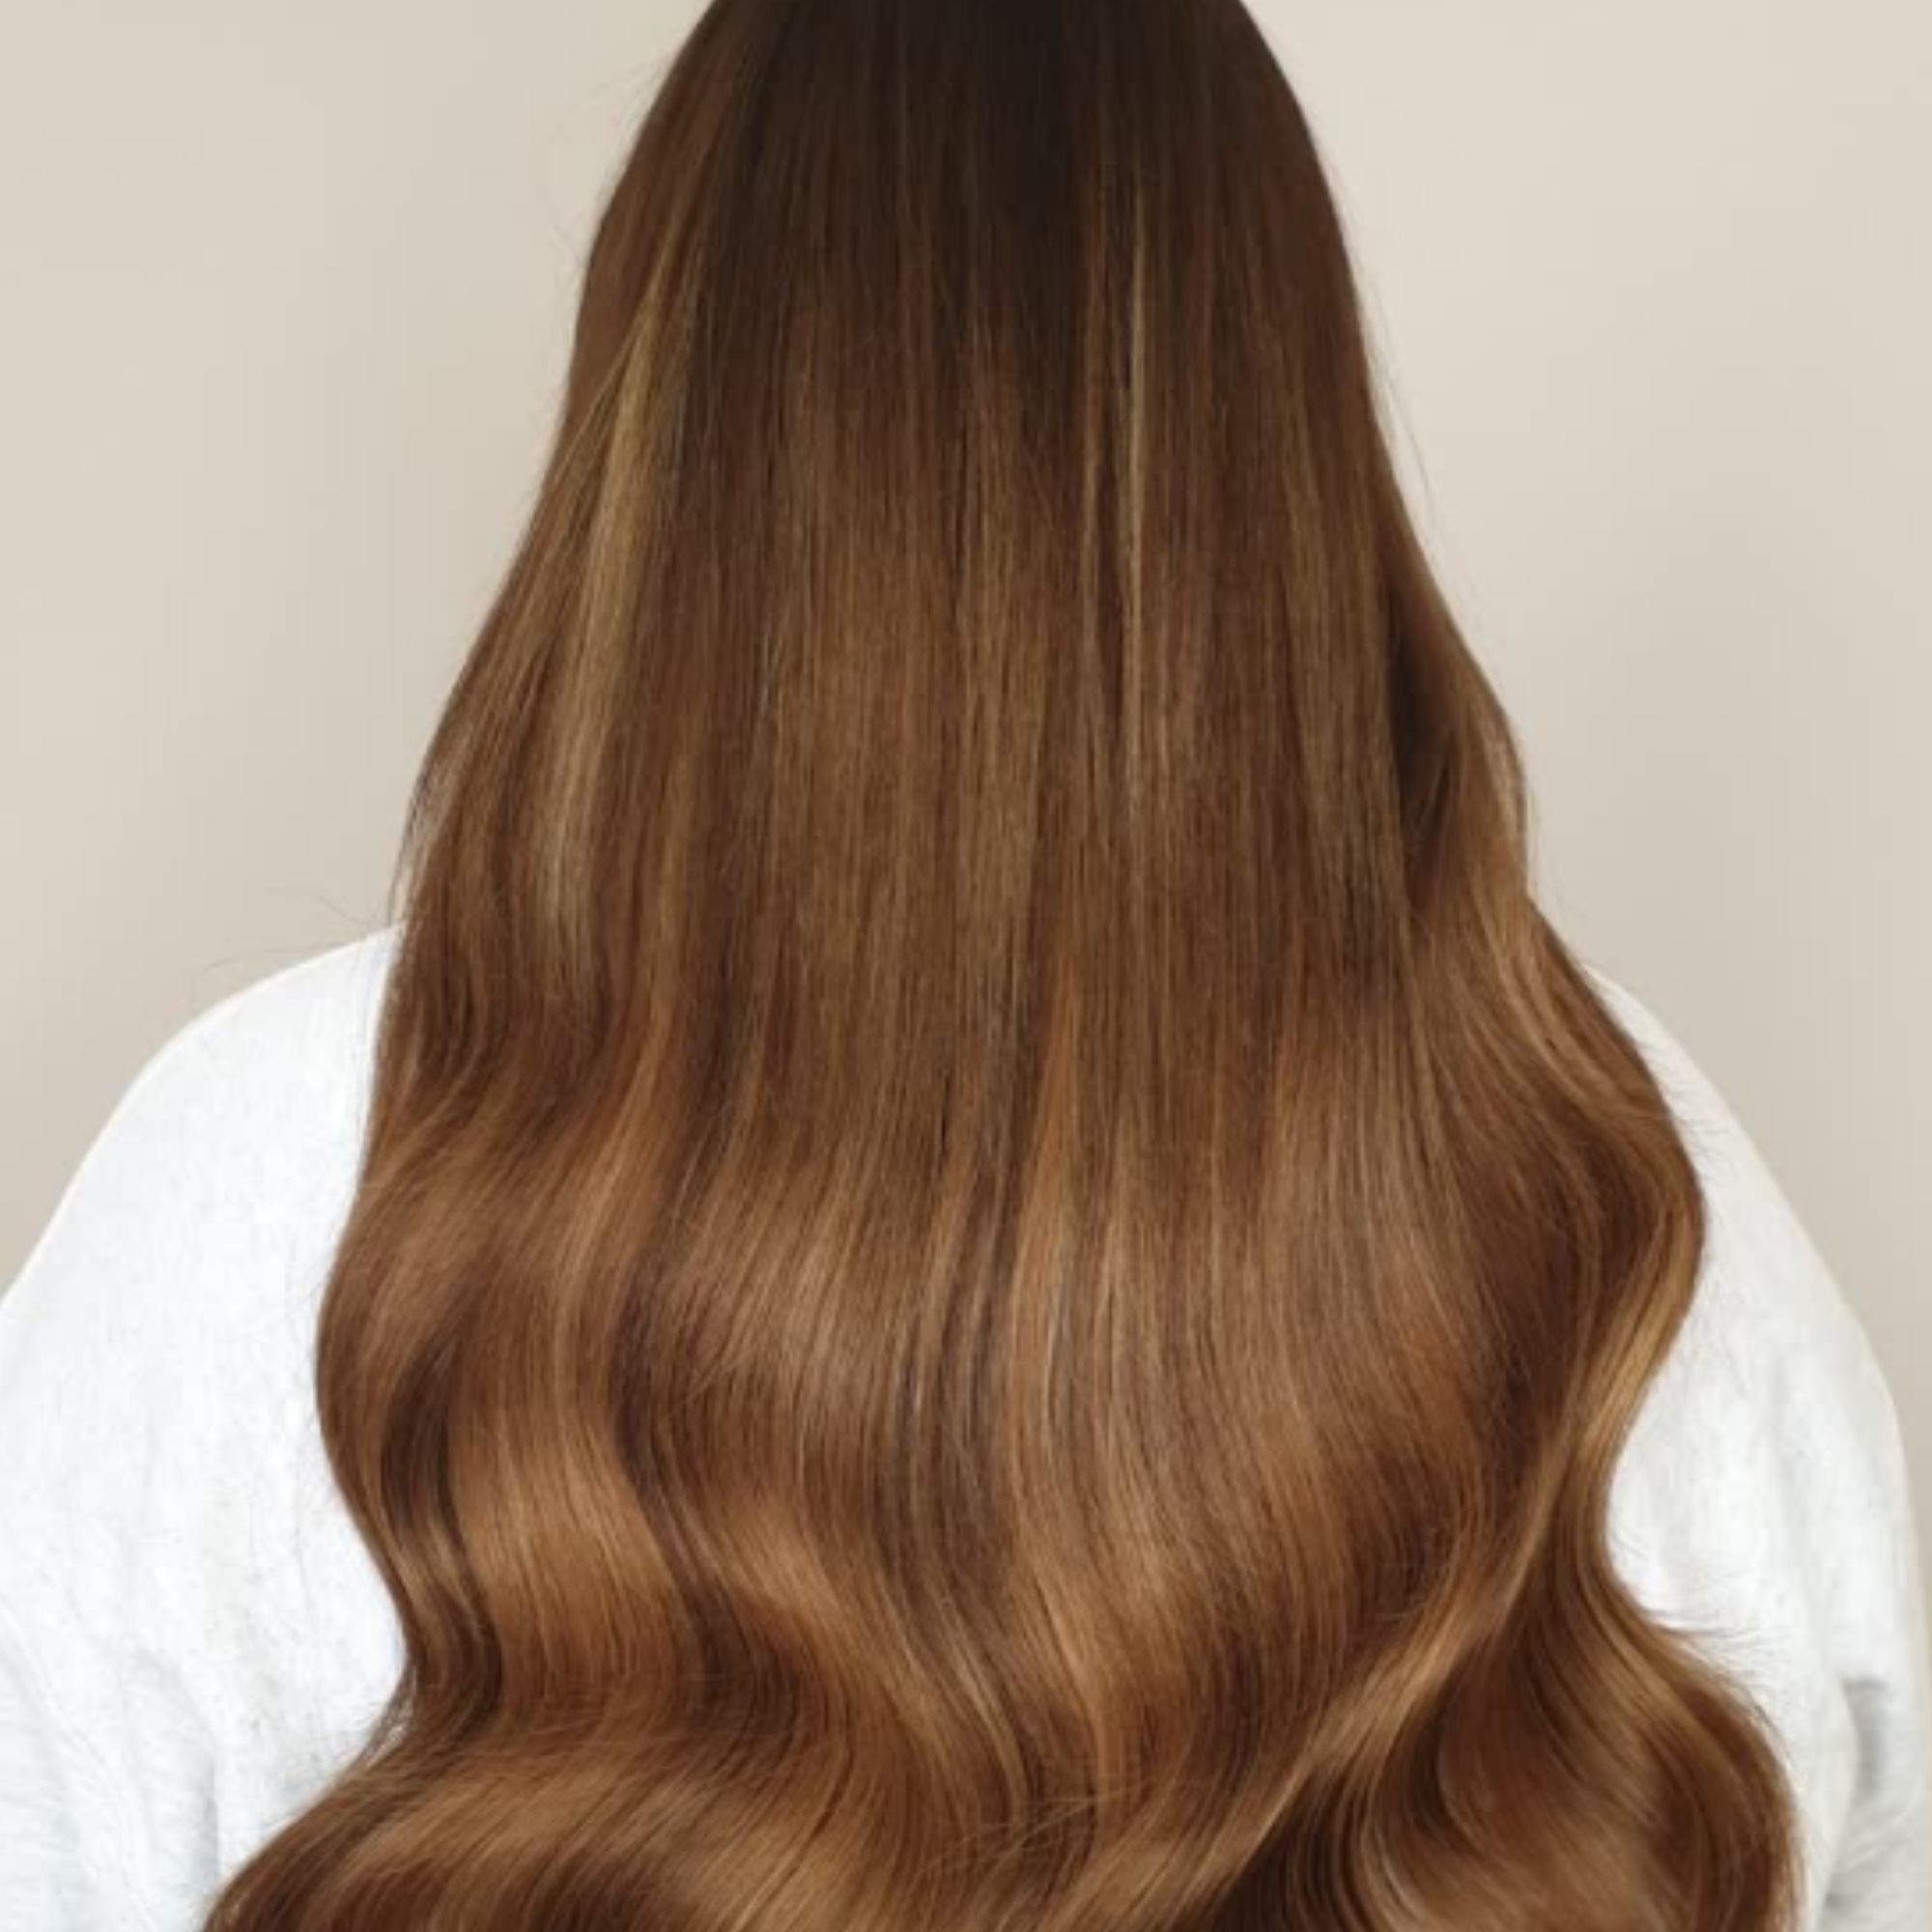 "hair rehab london 18" weft hair extensions shade swatch titled gorgeous gossip"